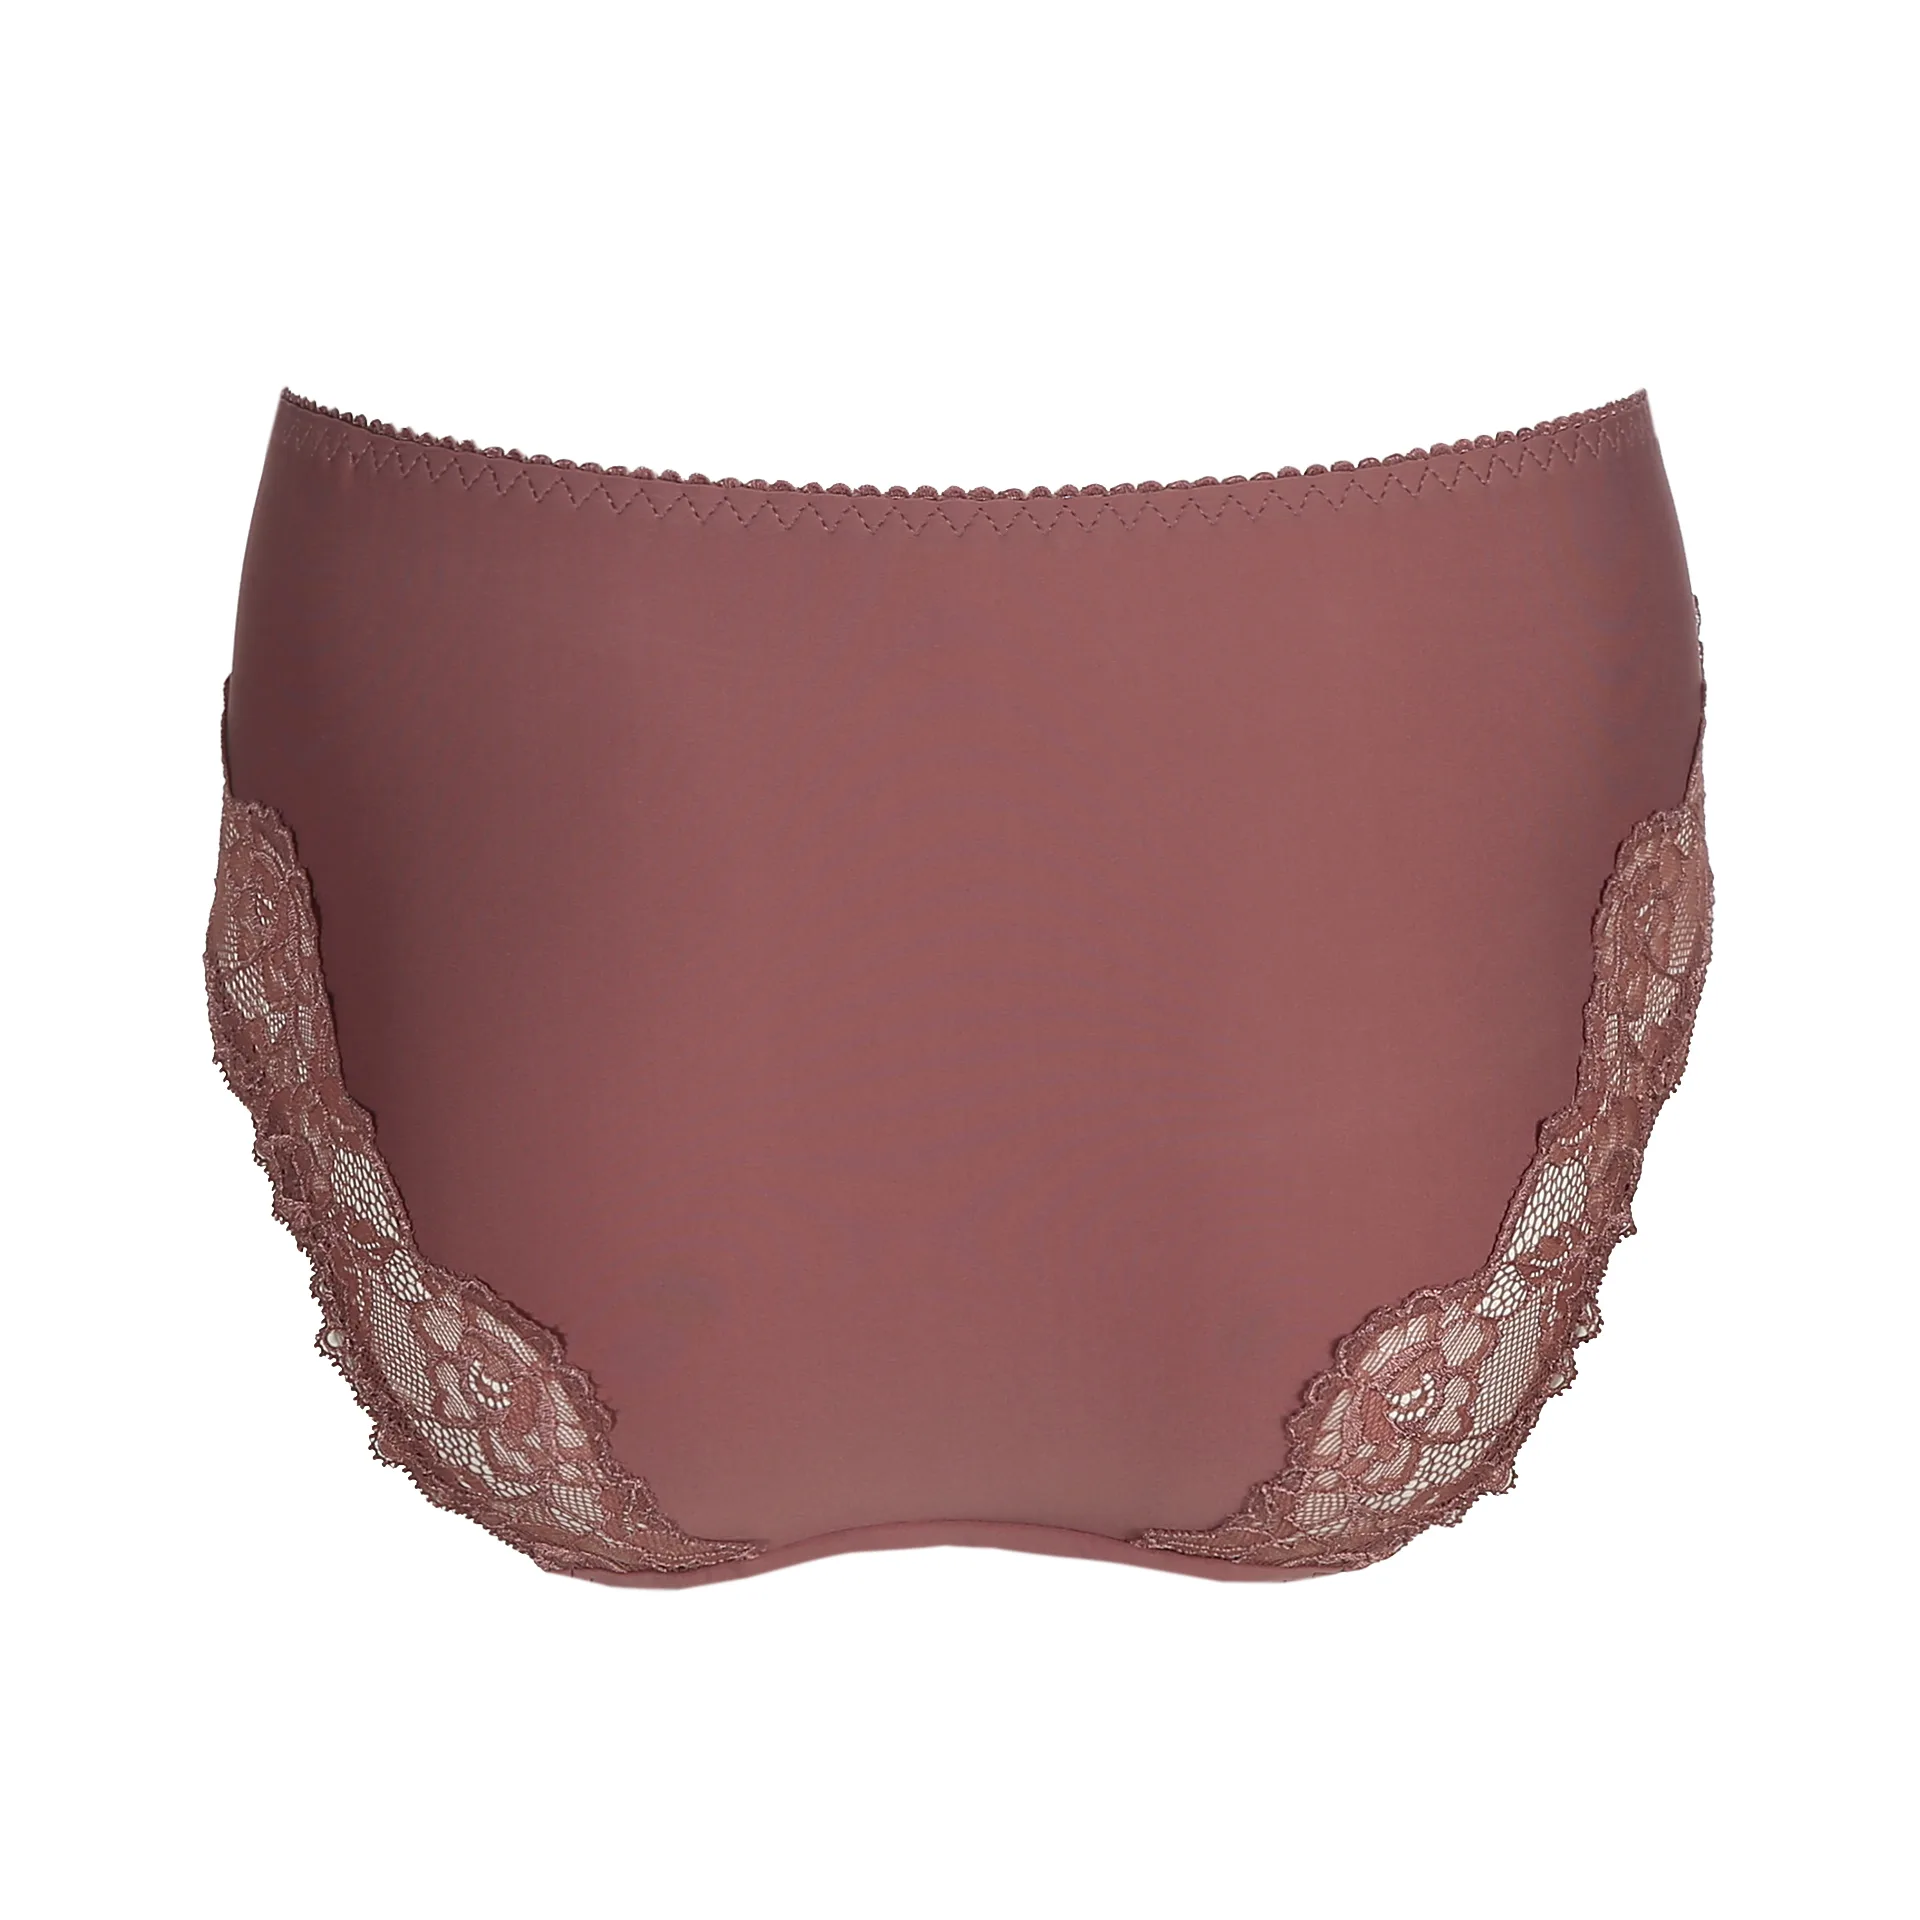 Madison Thong Panty Satin Taupe 0662125 - Lace & Day